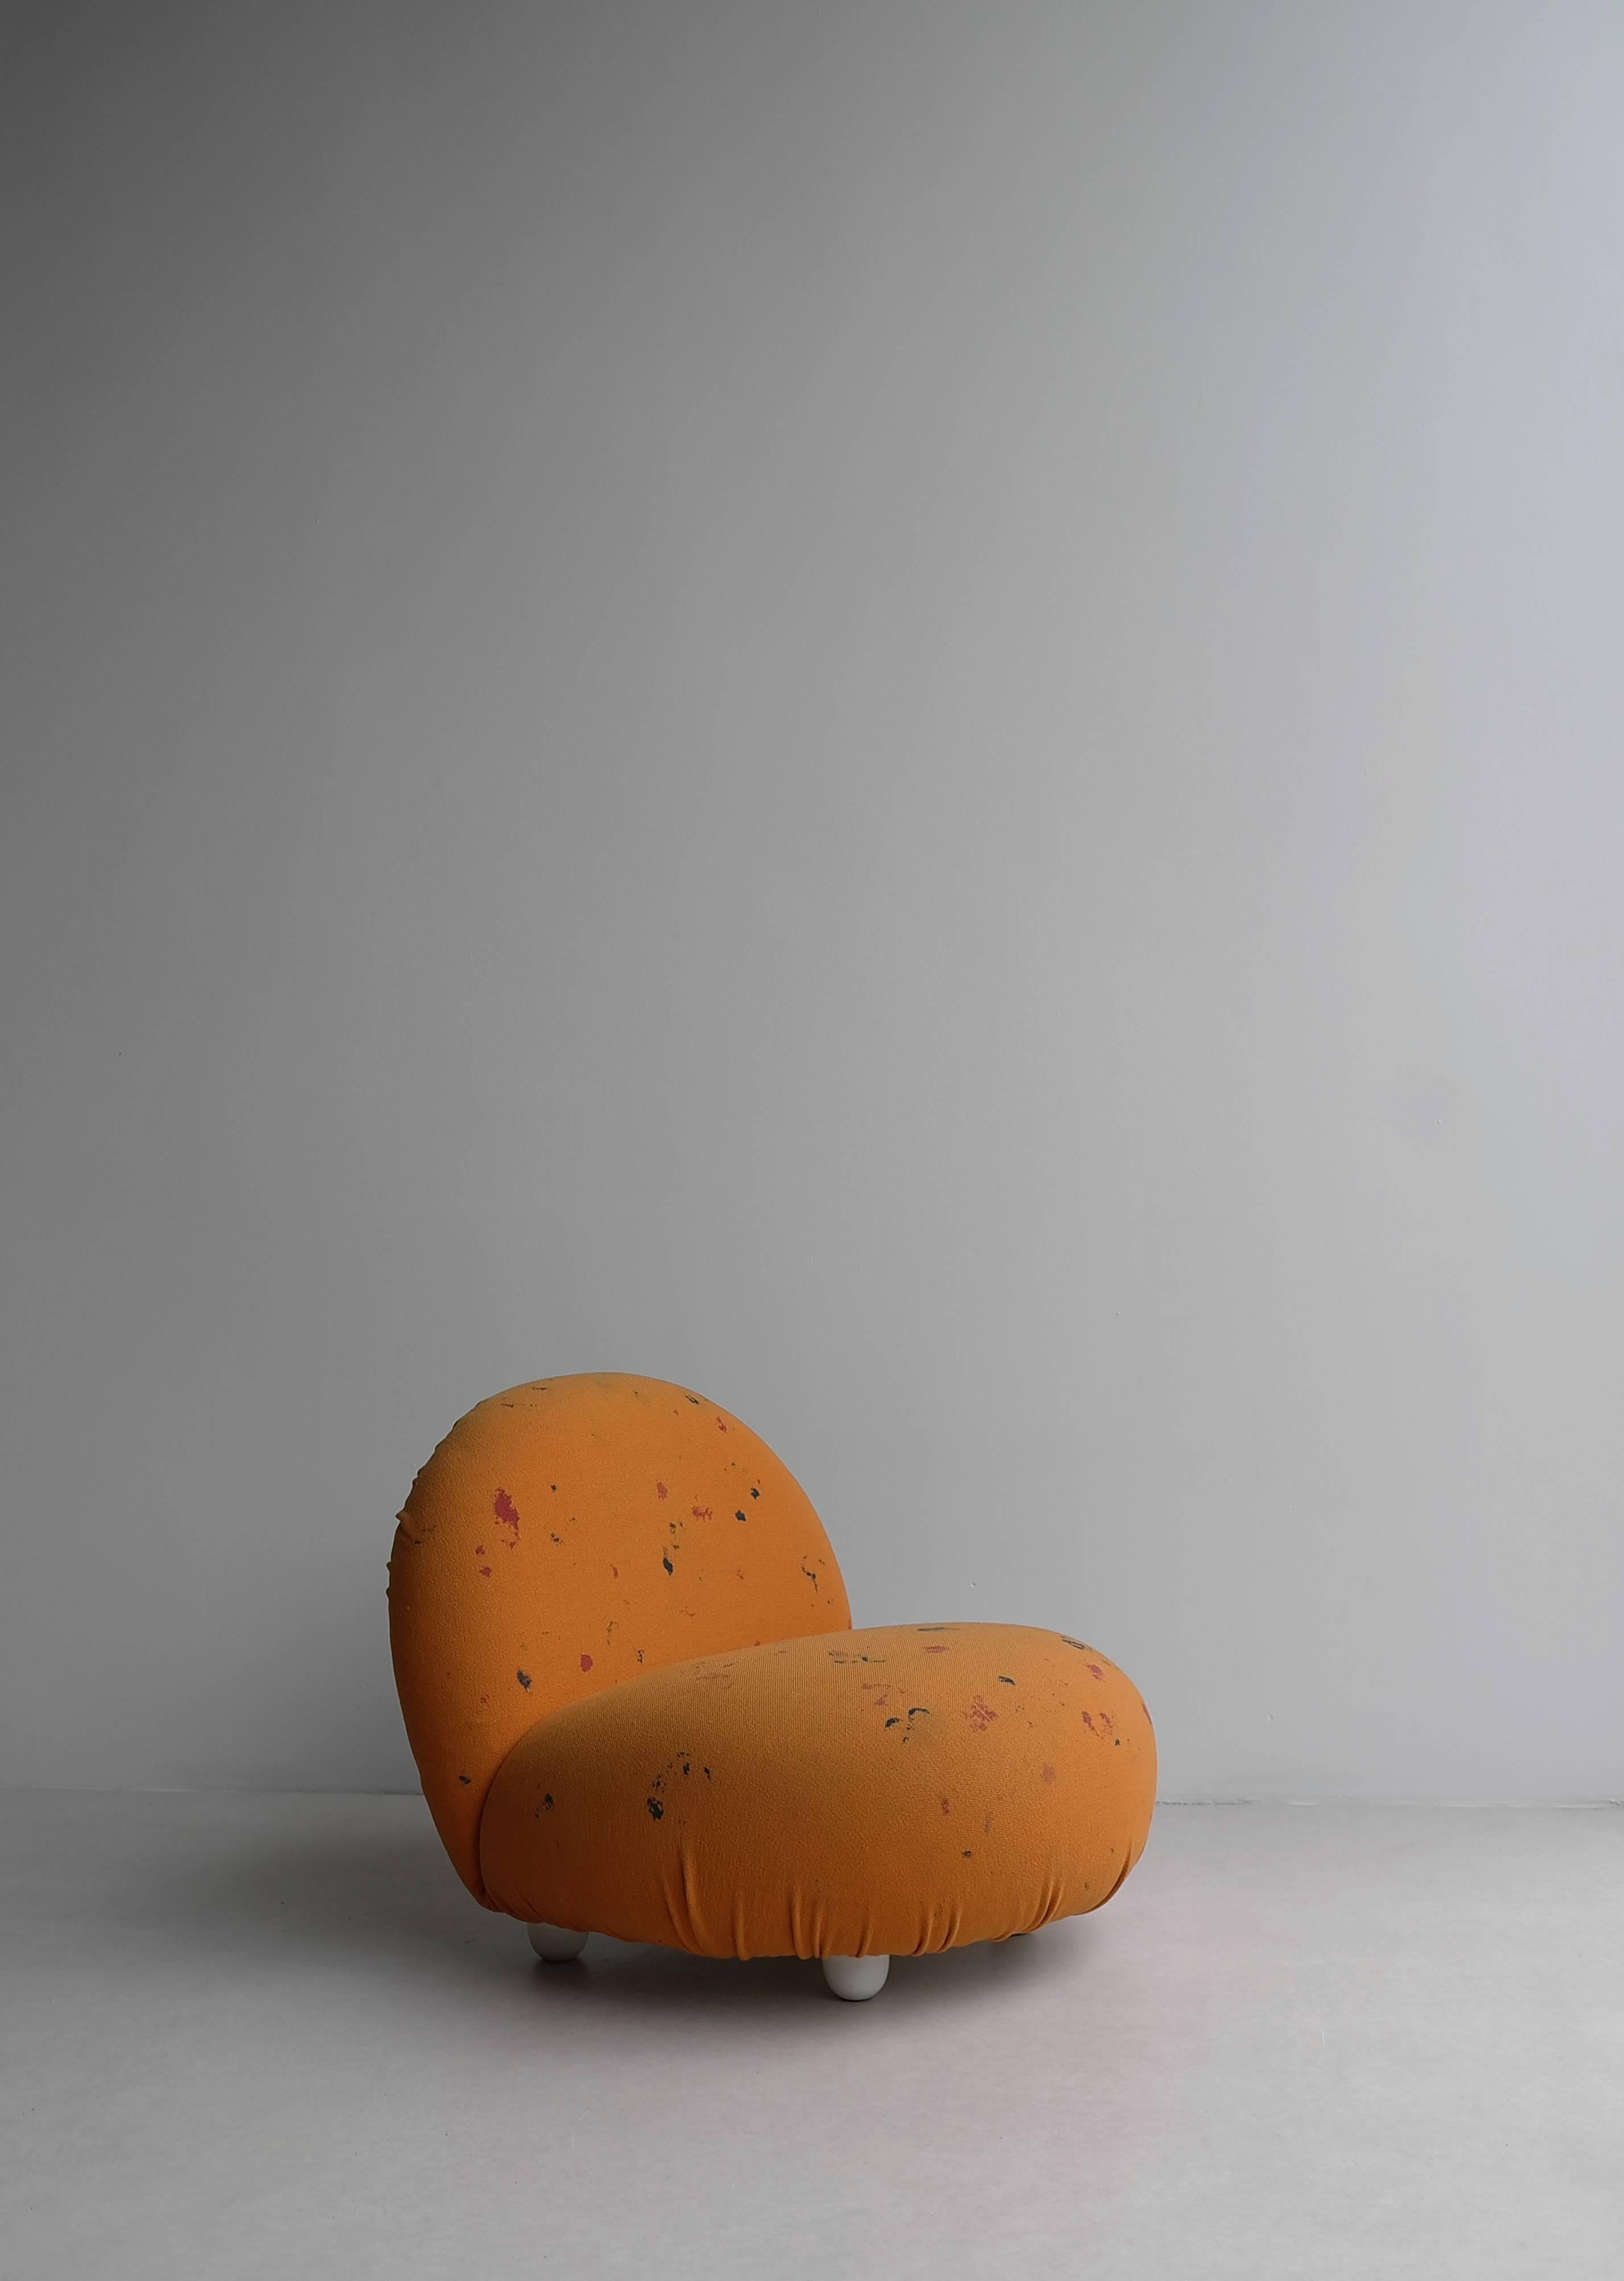 Rare Pierre Paulin art edition Blubblub chair model 270 by Artifort.
The chair has the original art edition upholstery, it came like this from the Artifort factory. Orange wool with inserted paint dots.